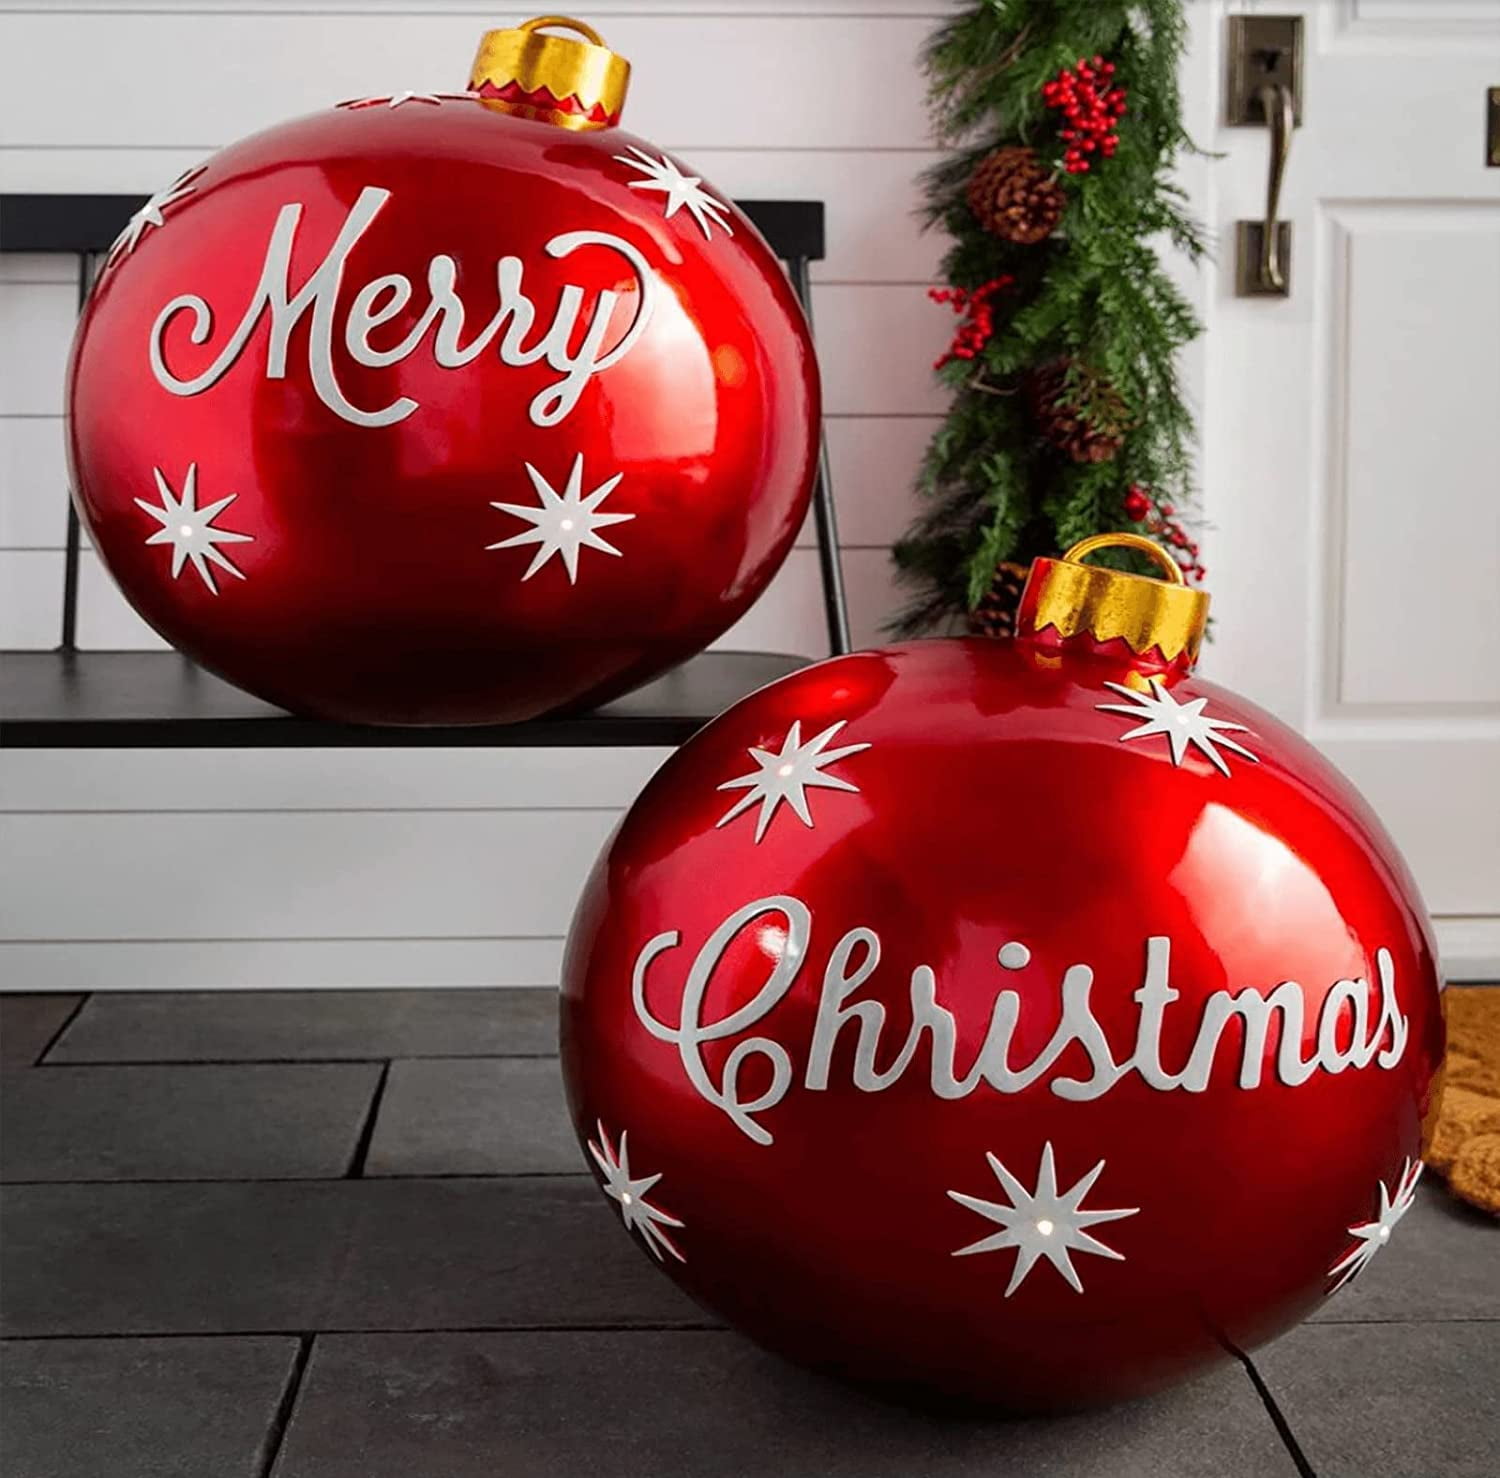 FFNMZC Christmas Ornaments,Outdoor Inflatable Decorated Ball,23.6 inch PVC Giant Christmas Inflatable Ball,Christmas Tree Decorations Art Garden Home Patio Decor for Home Christmas Festive Gift Ball 